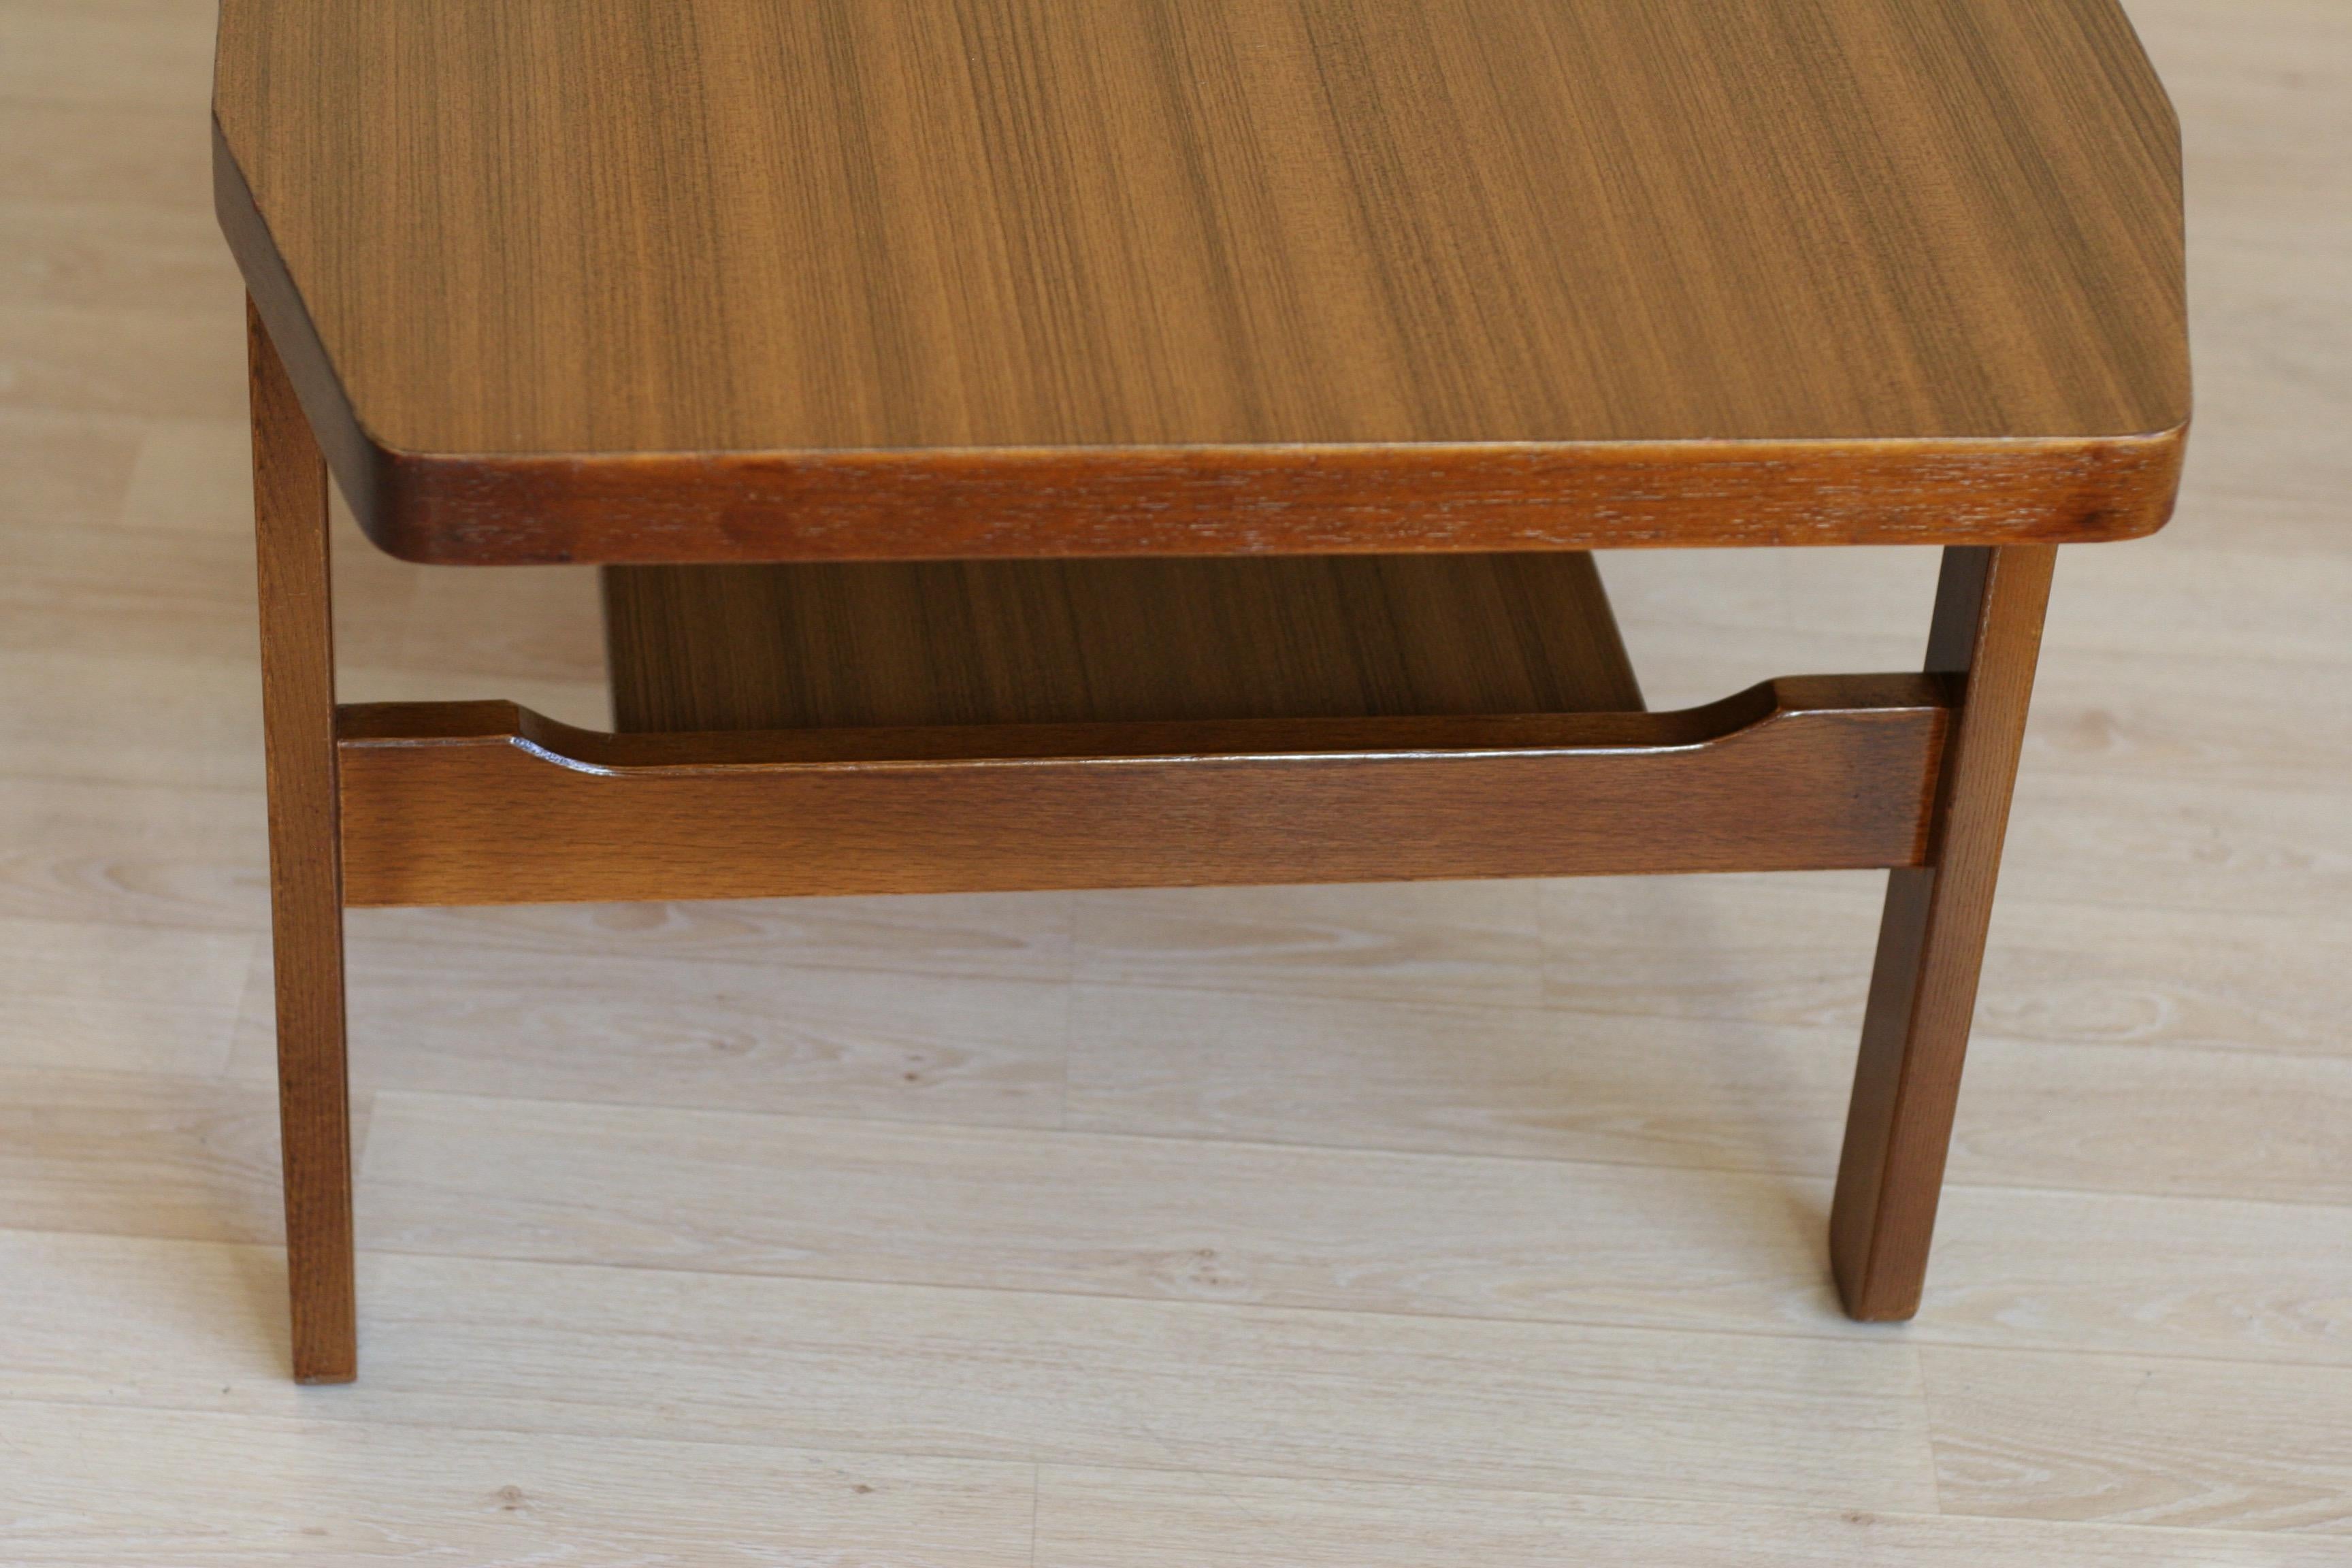 Vintage Lithuanian Hexagon Form Wooden Coffee Table, 1970s For Sale 3